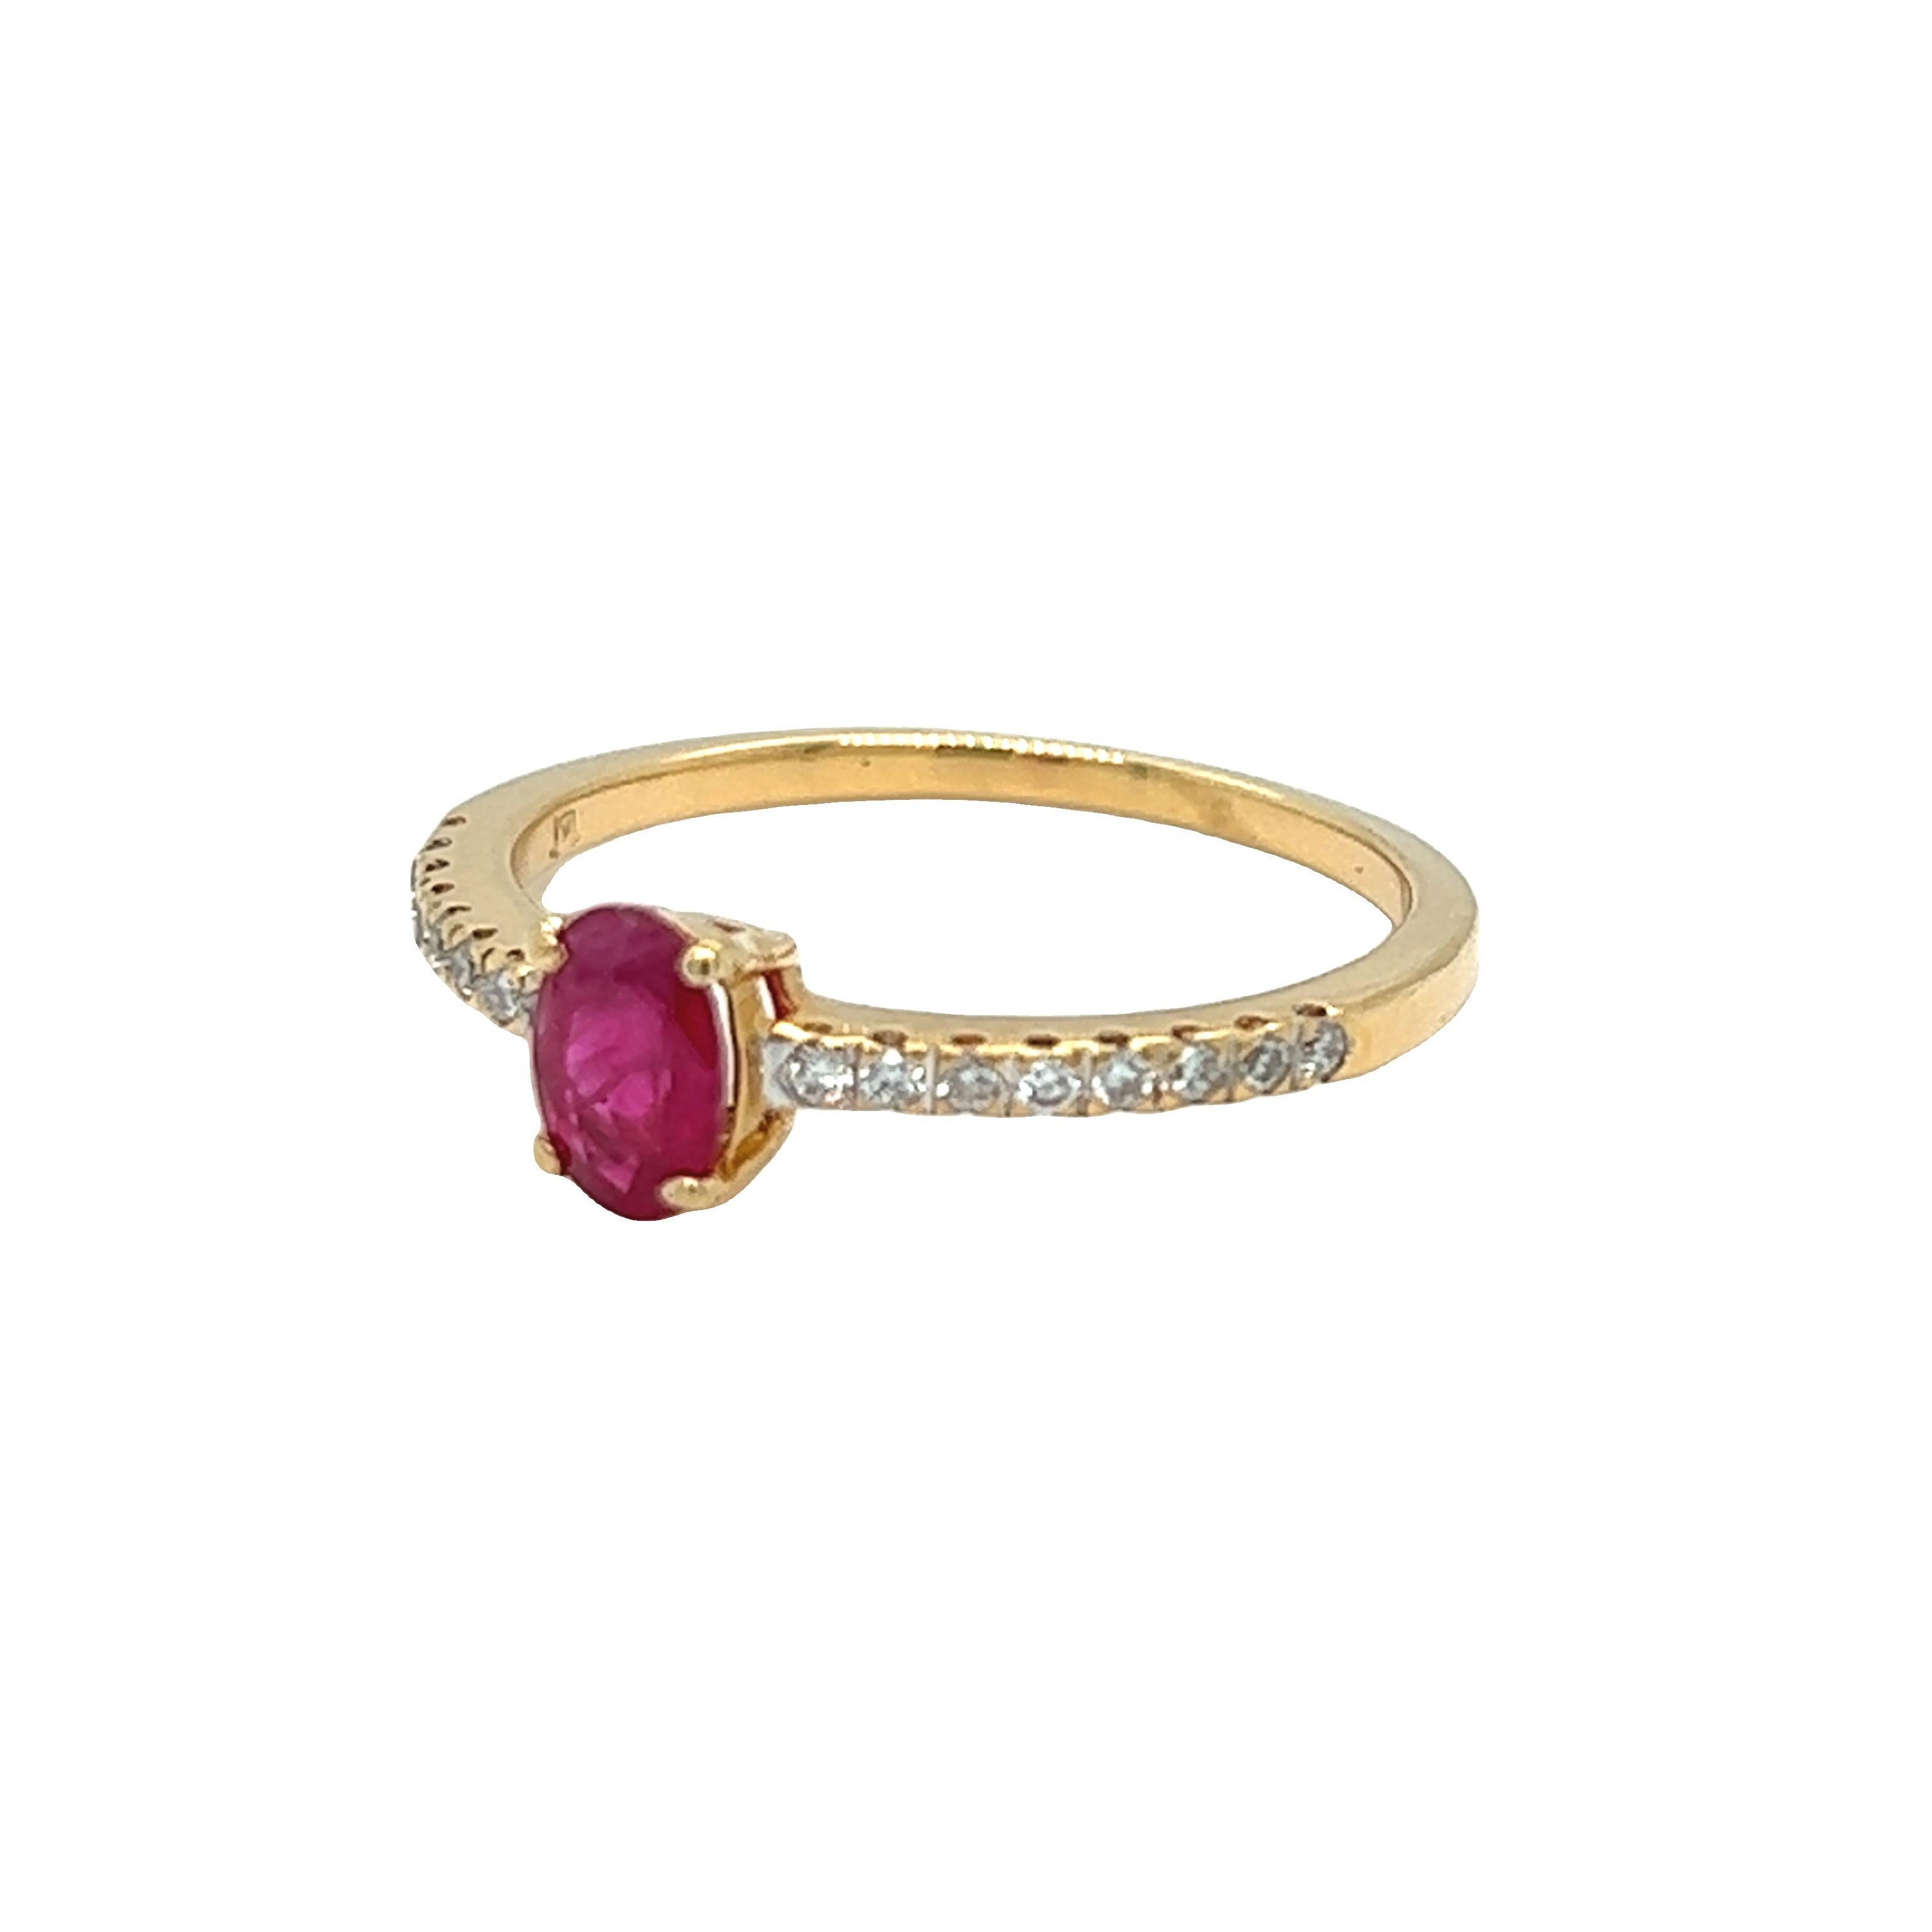 0.40 Carat Ruby Solitaire and Diamond Ring 18K Yellow Gold Engagement Ring In Excellent Condition For Sale In beverly hills, CA